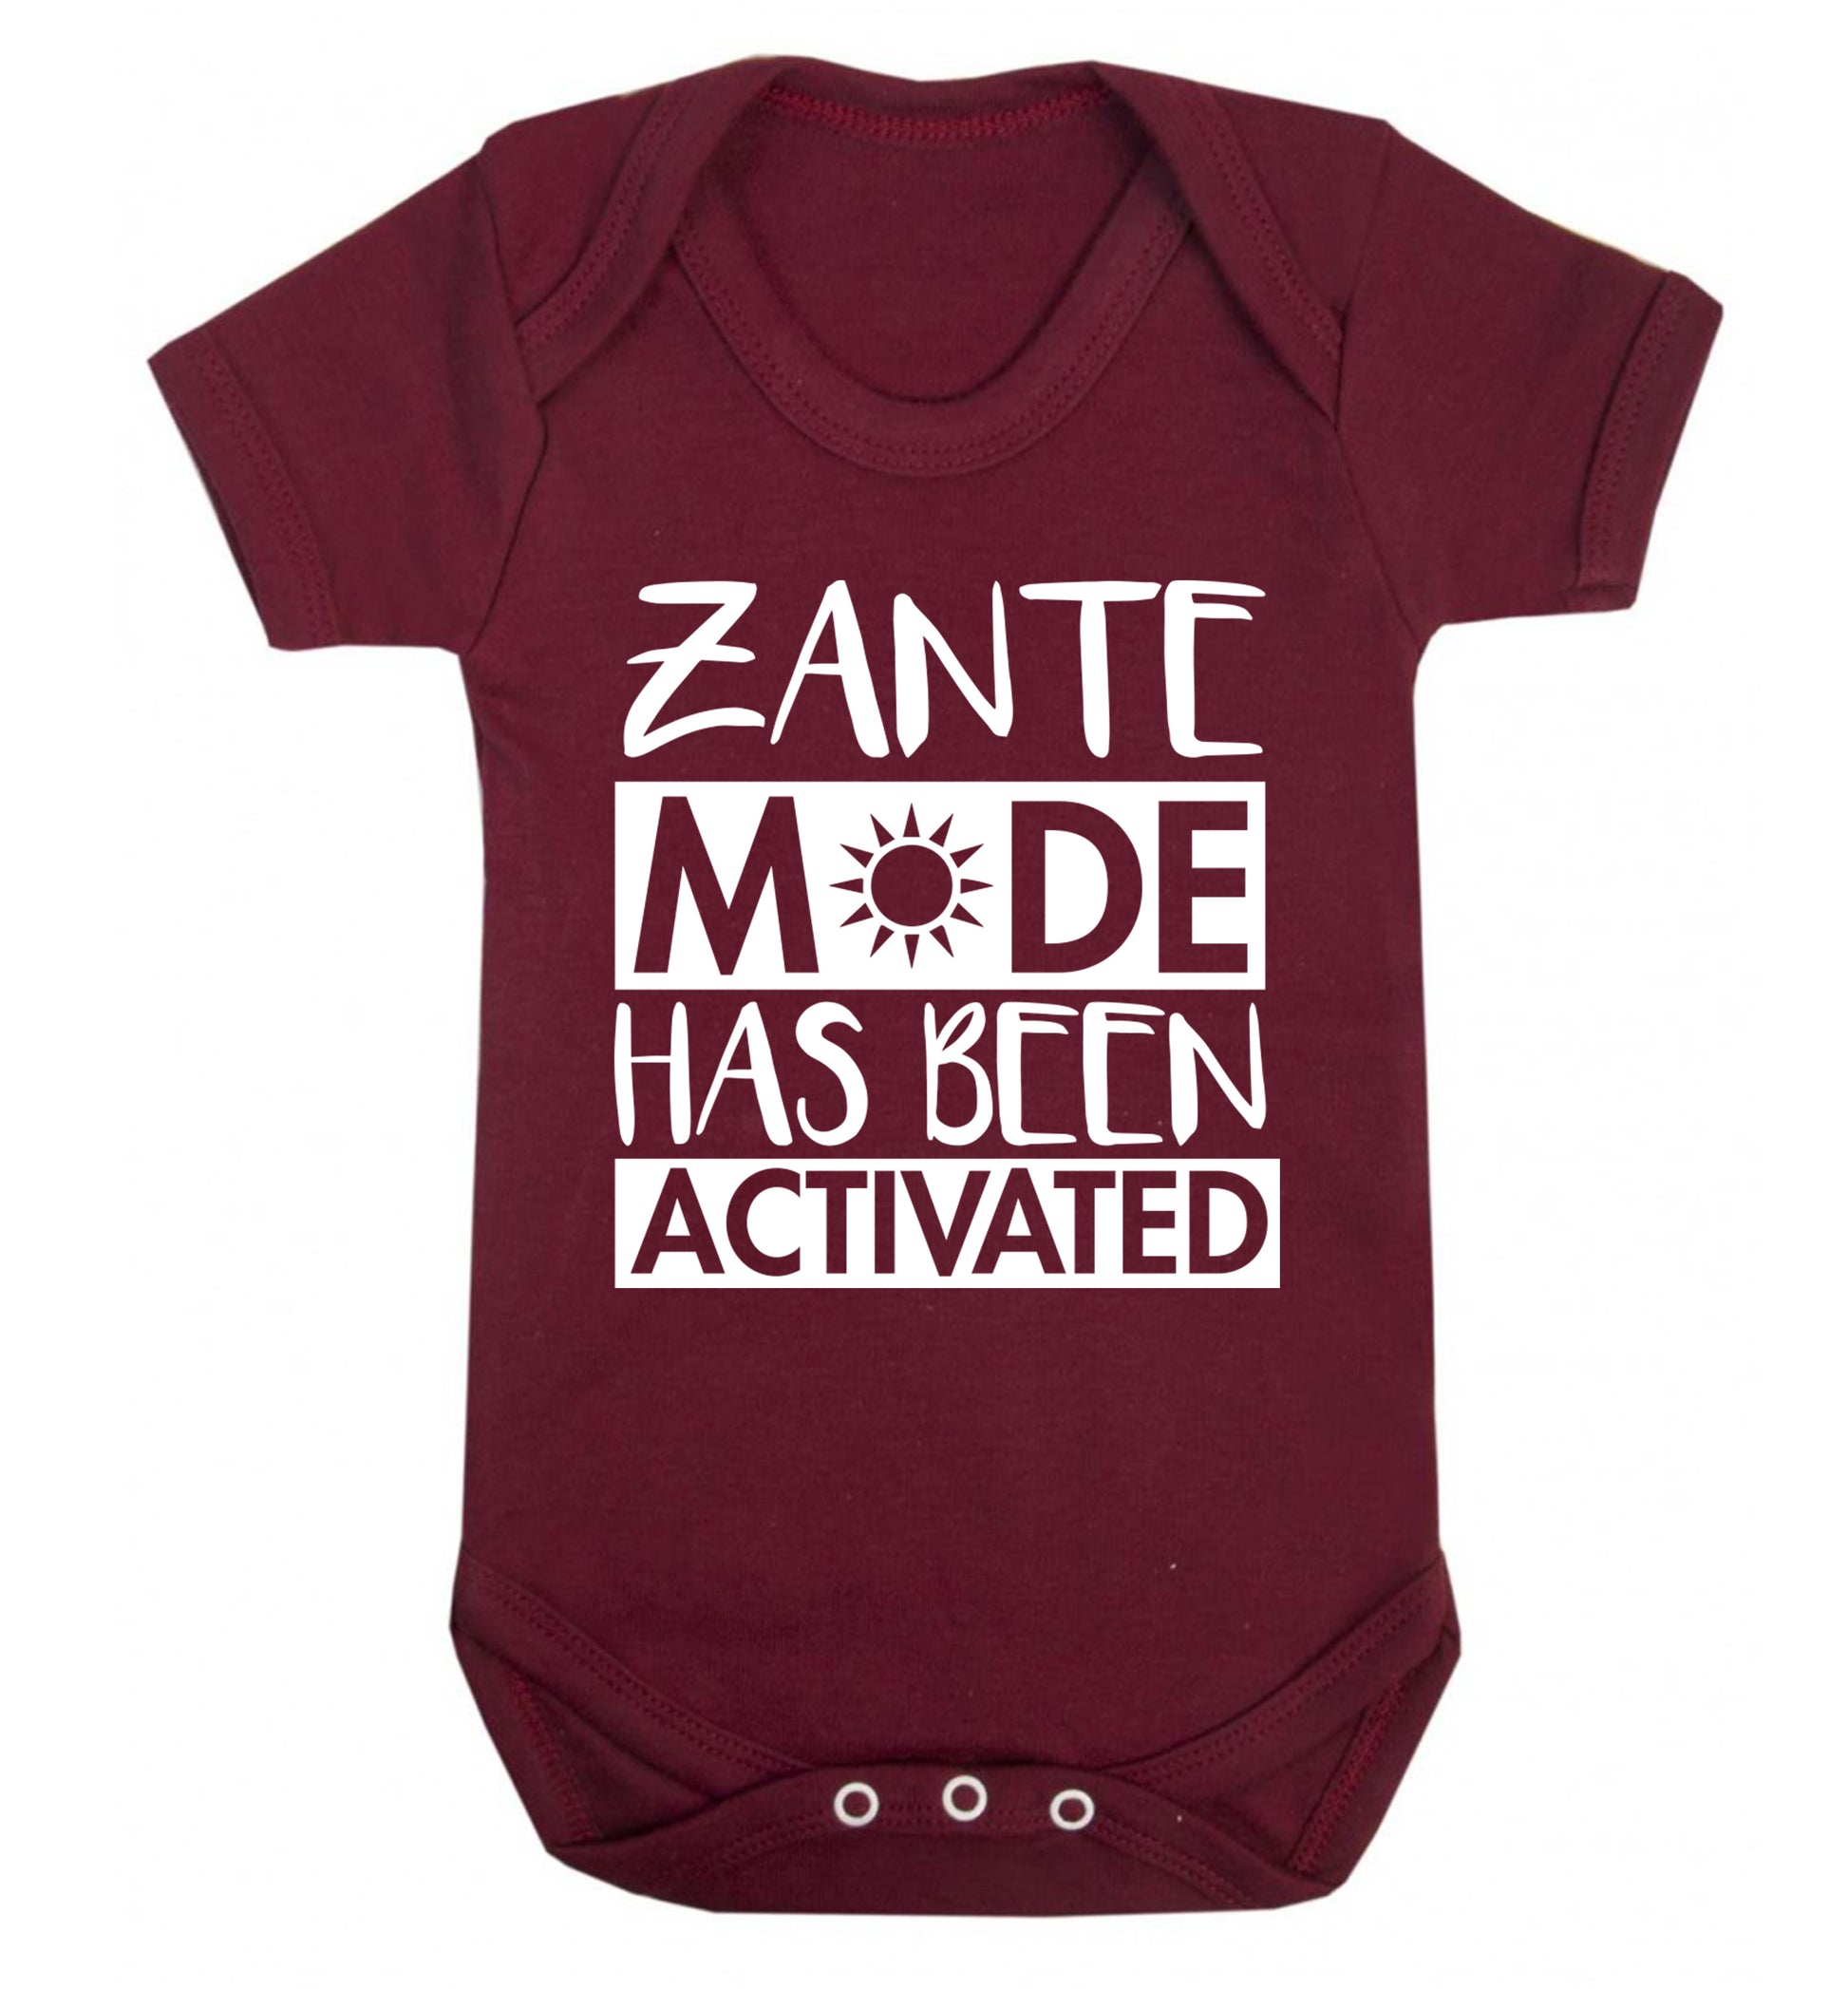 Zante mode has been activated Baby Vest maroon 18-24 months